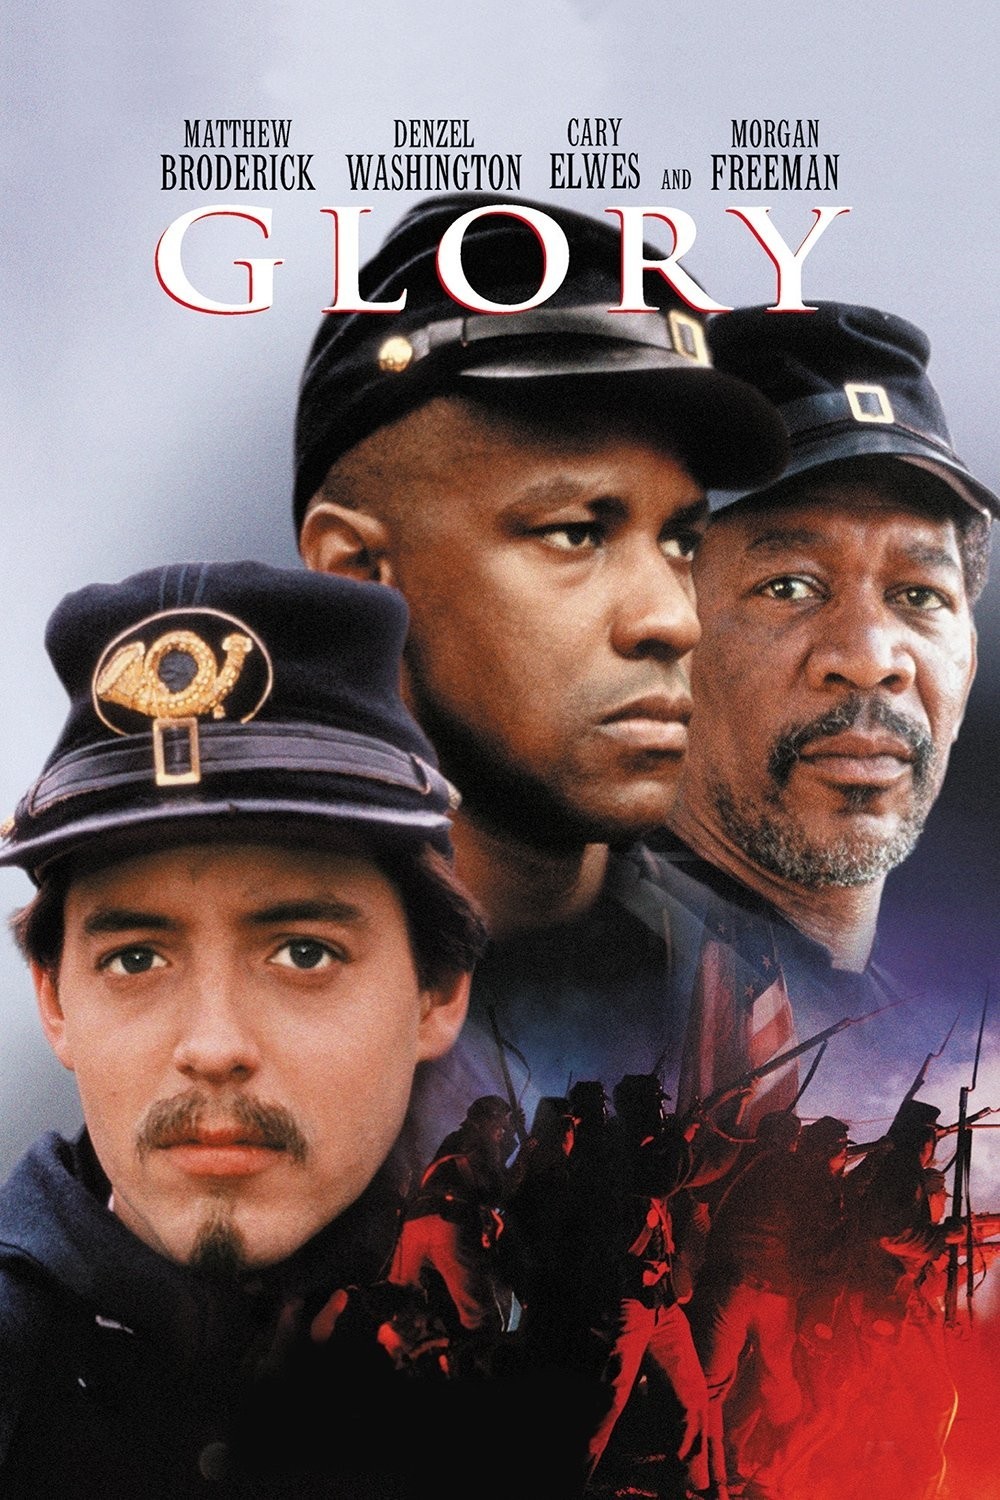 Released in 1989, the movie Glory depicted the Boston abolitionist Robert Gould Shaw's leadership of the 54th Massachusetts, one of the first all-black volunteer companies to fight for the Union Army in the American Civil War.